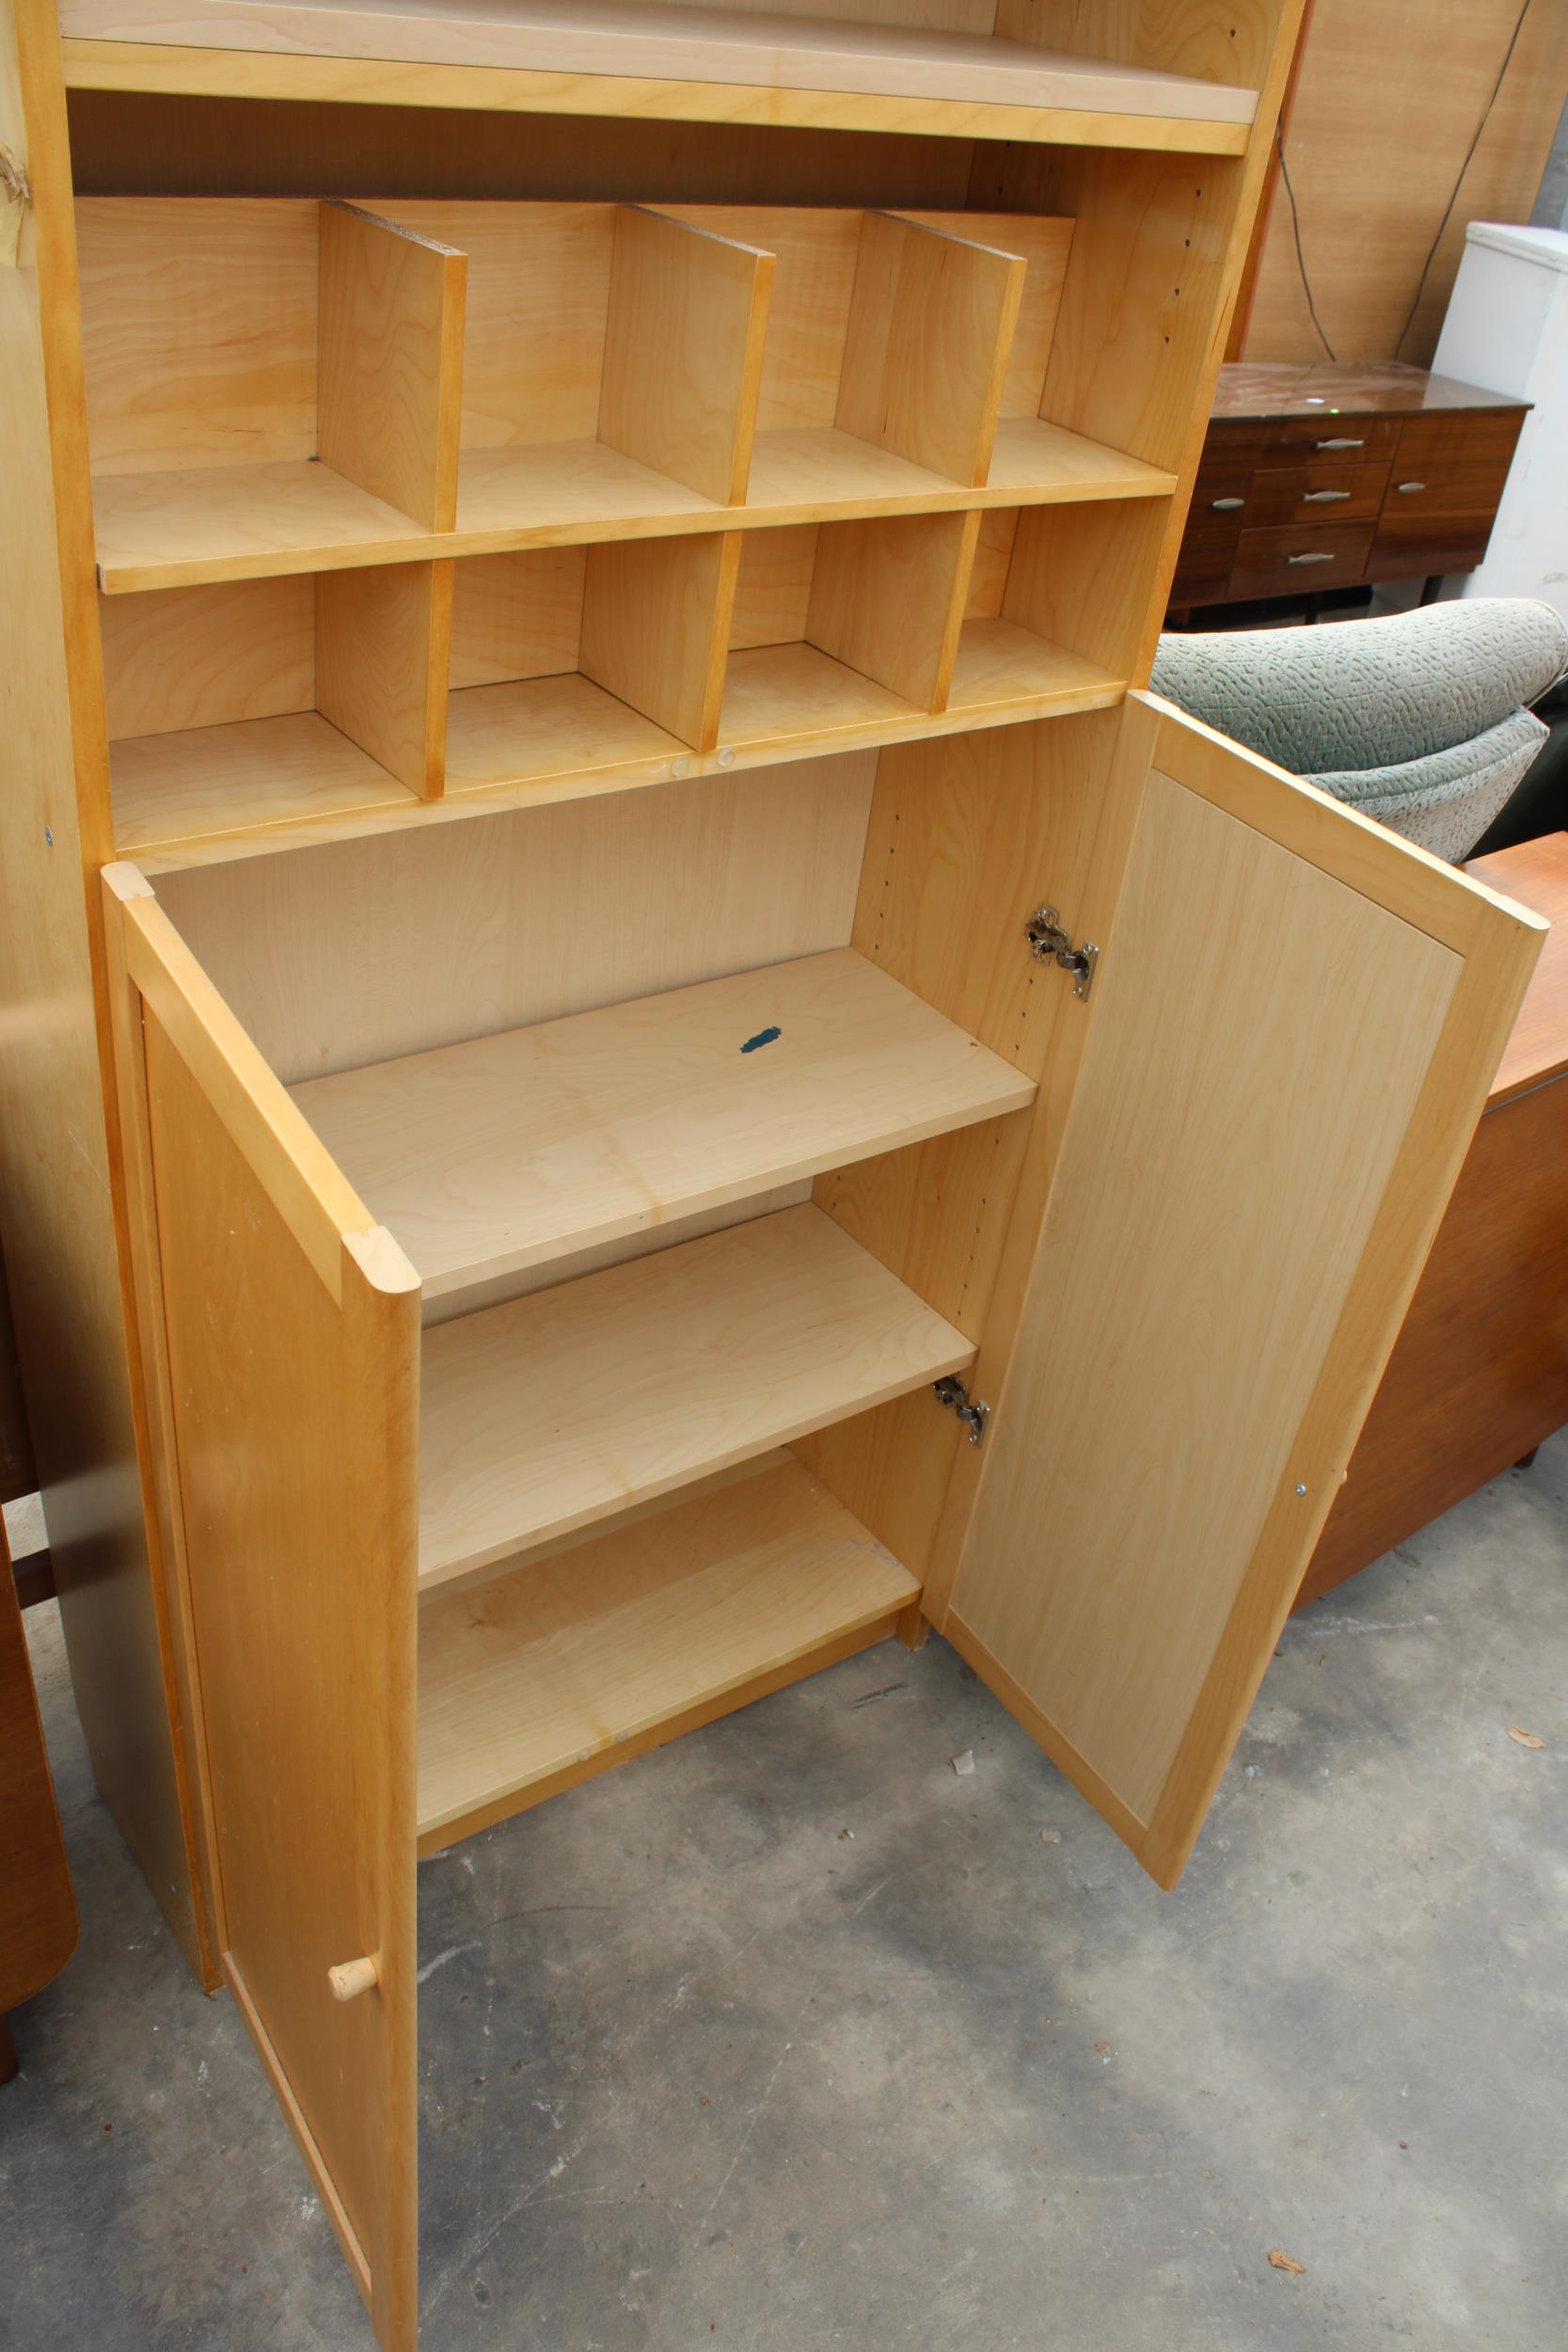 A MODERN PINE EFFECT STORAGE UNIT WITH CUPBOARDS AND SHELVES, 31.5" WIDE - Image 3 of 3